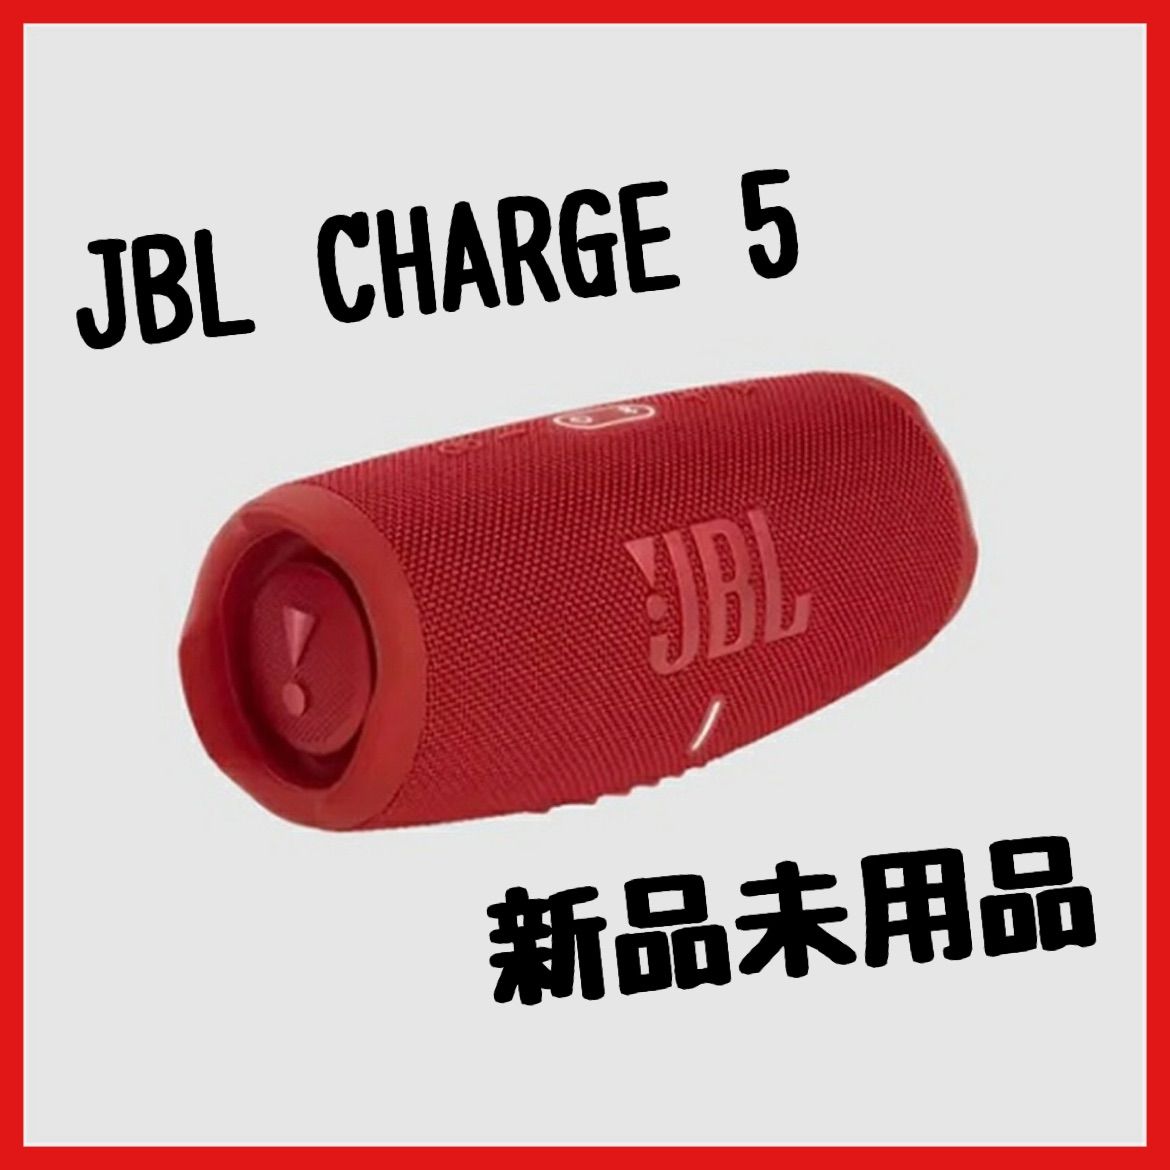 JBL CHARGE 5 チャージ5 レッド RED